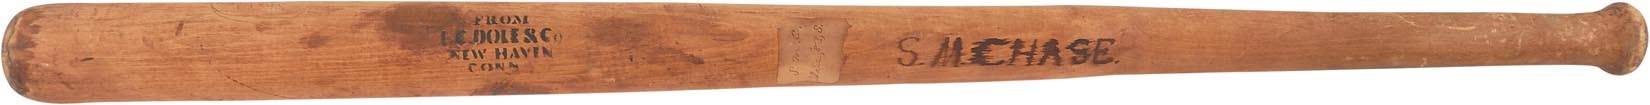 - 1883 L.C. Dole Bat Used by Samuel M. Chase for Yale